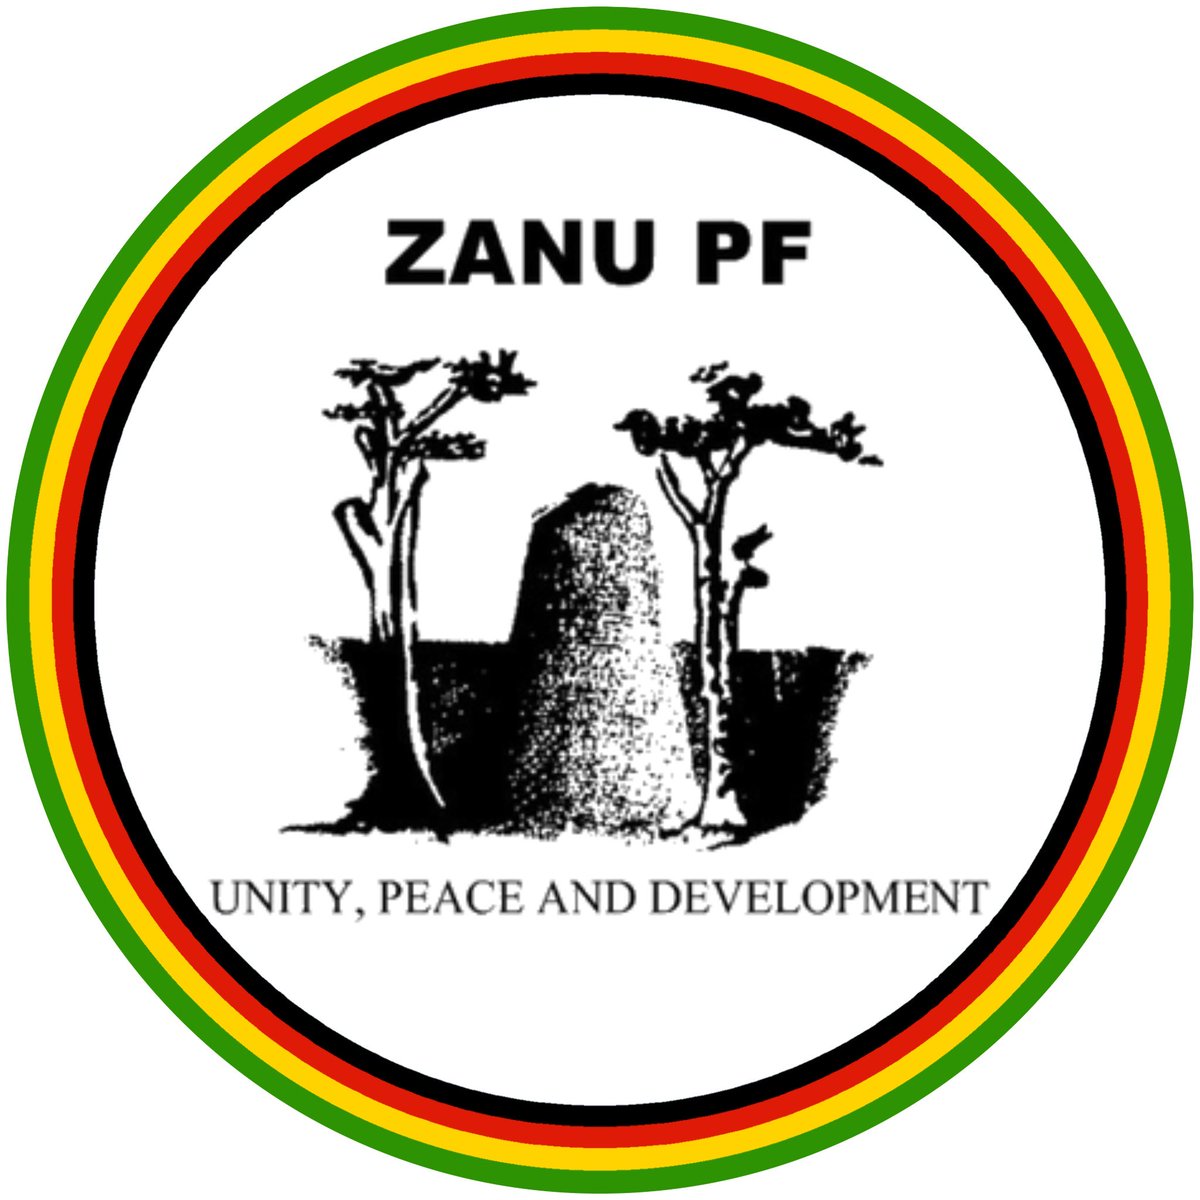 Join Zanu PF, the People’s Party. Western sponsored opposition groups will never get to the State House.